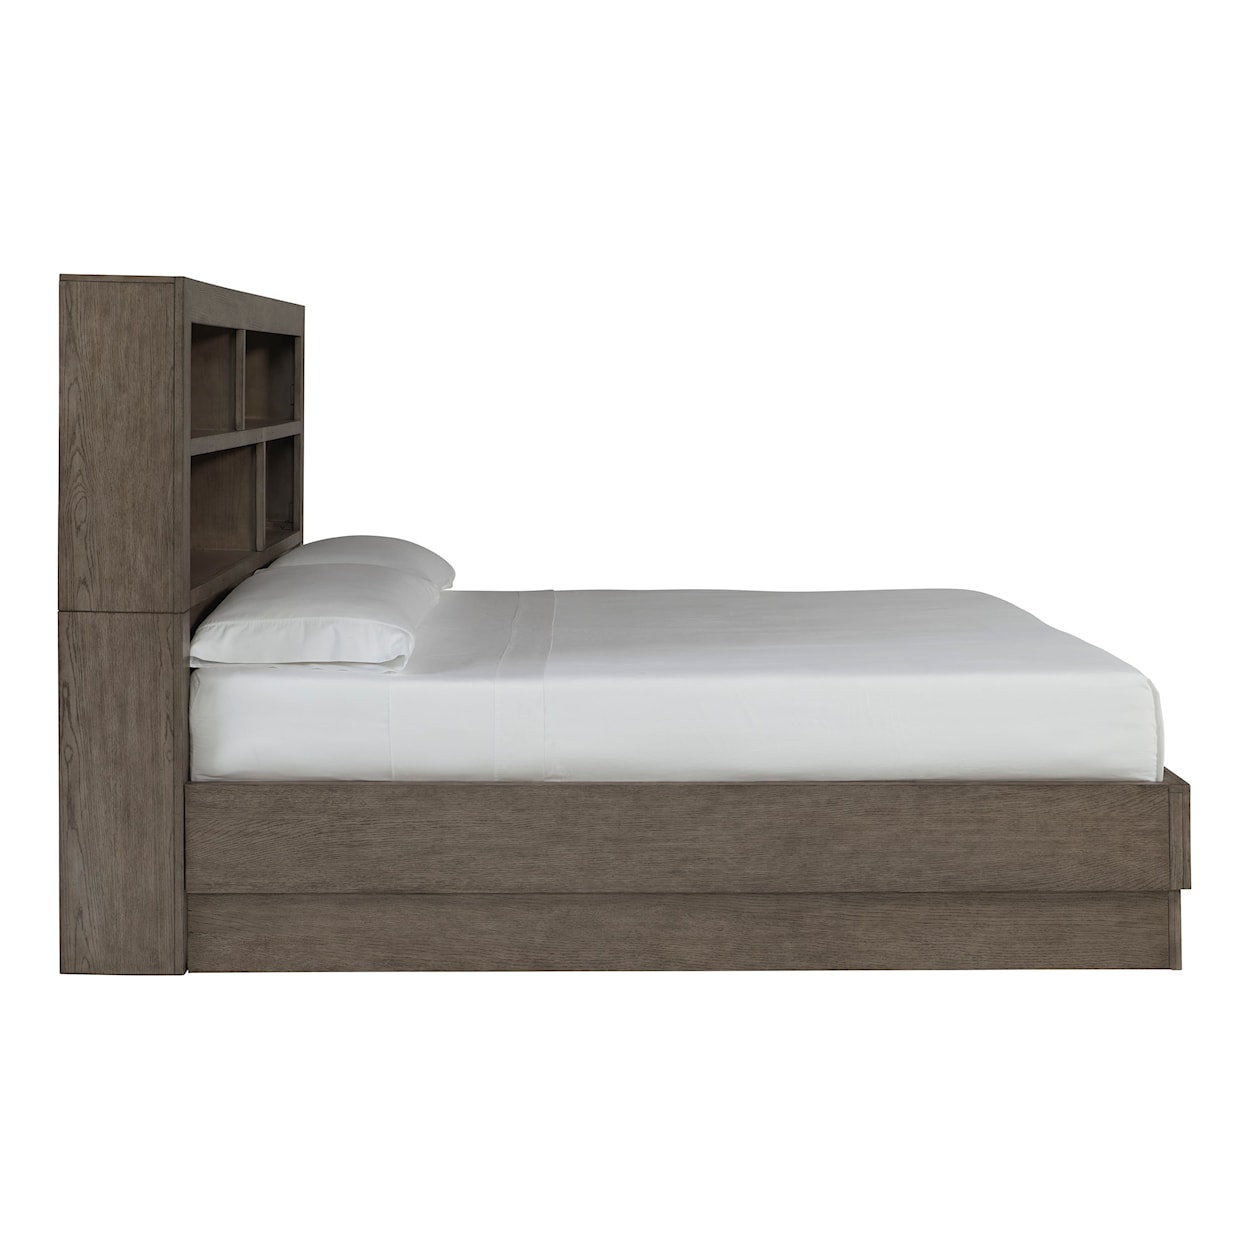 Benchcraft Anibecca King Bookcase Bed